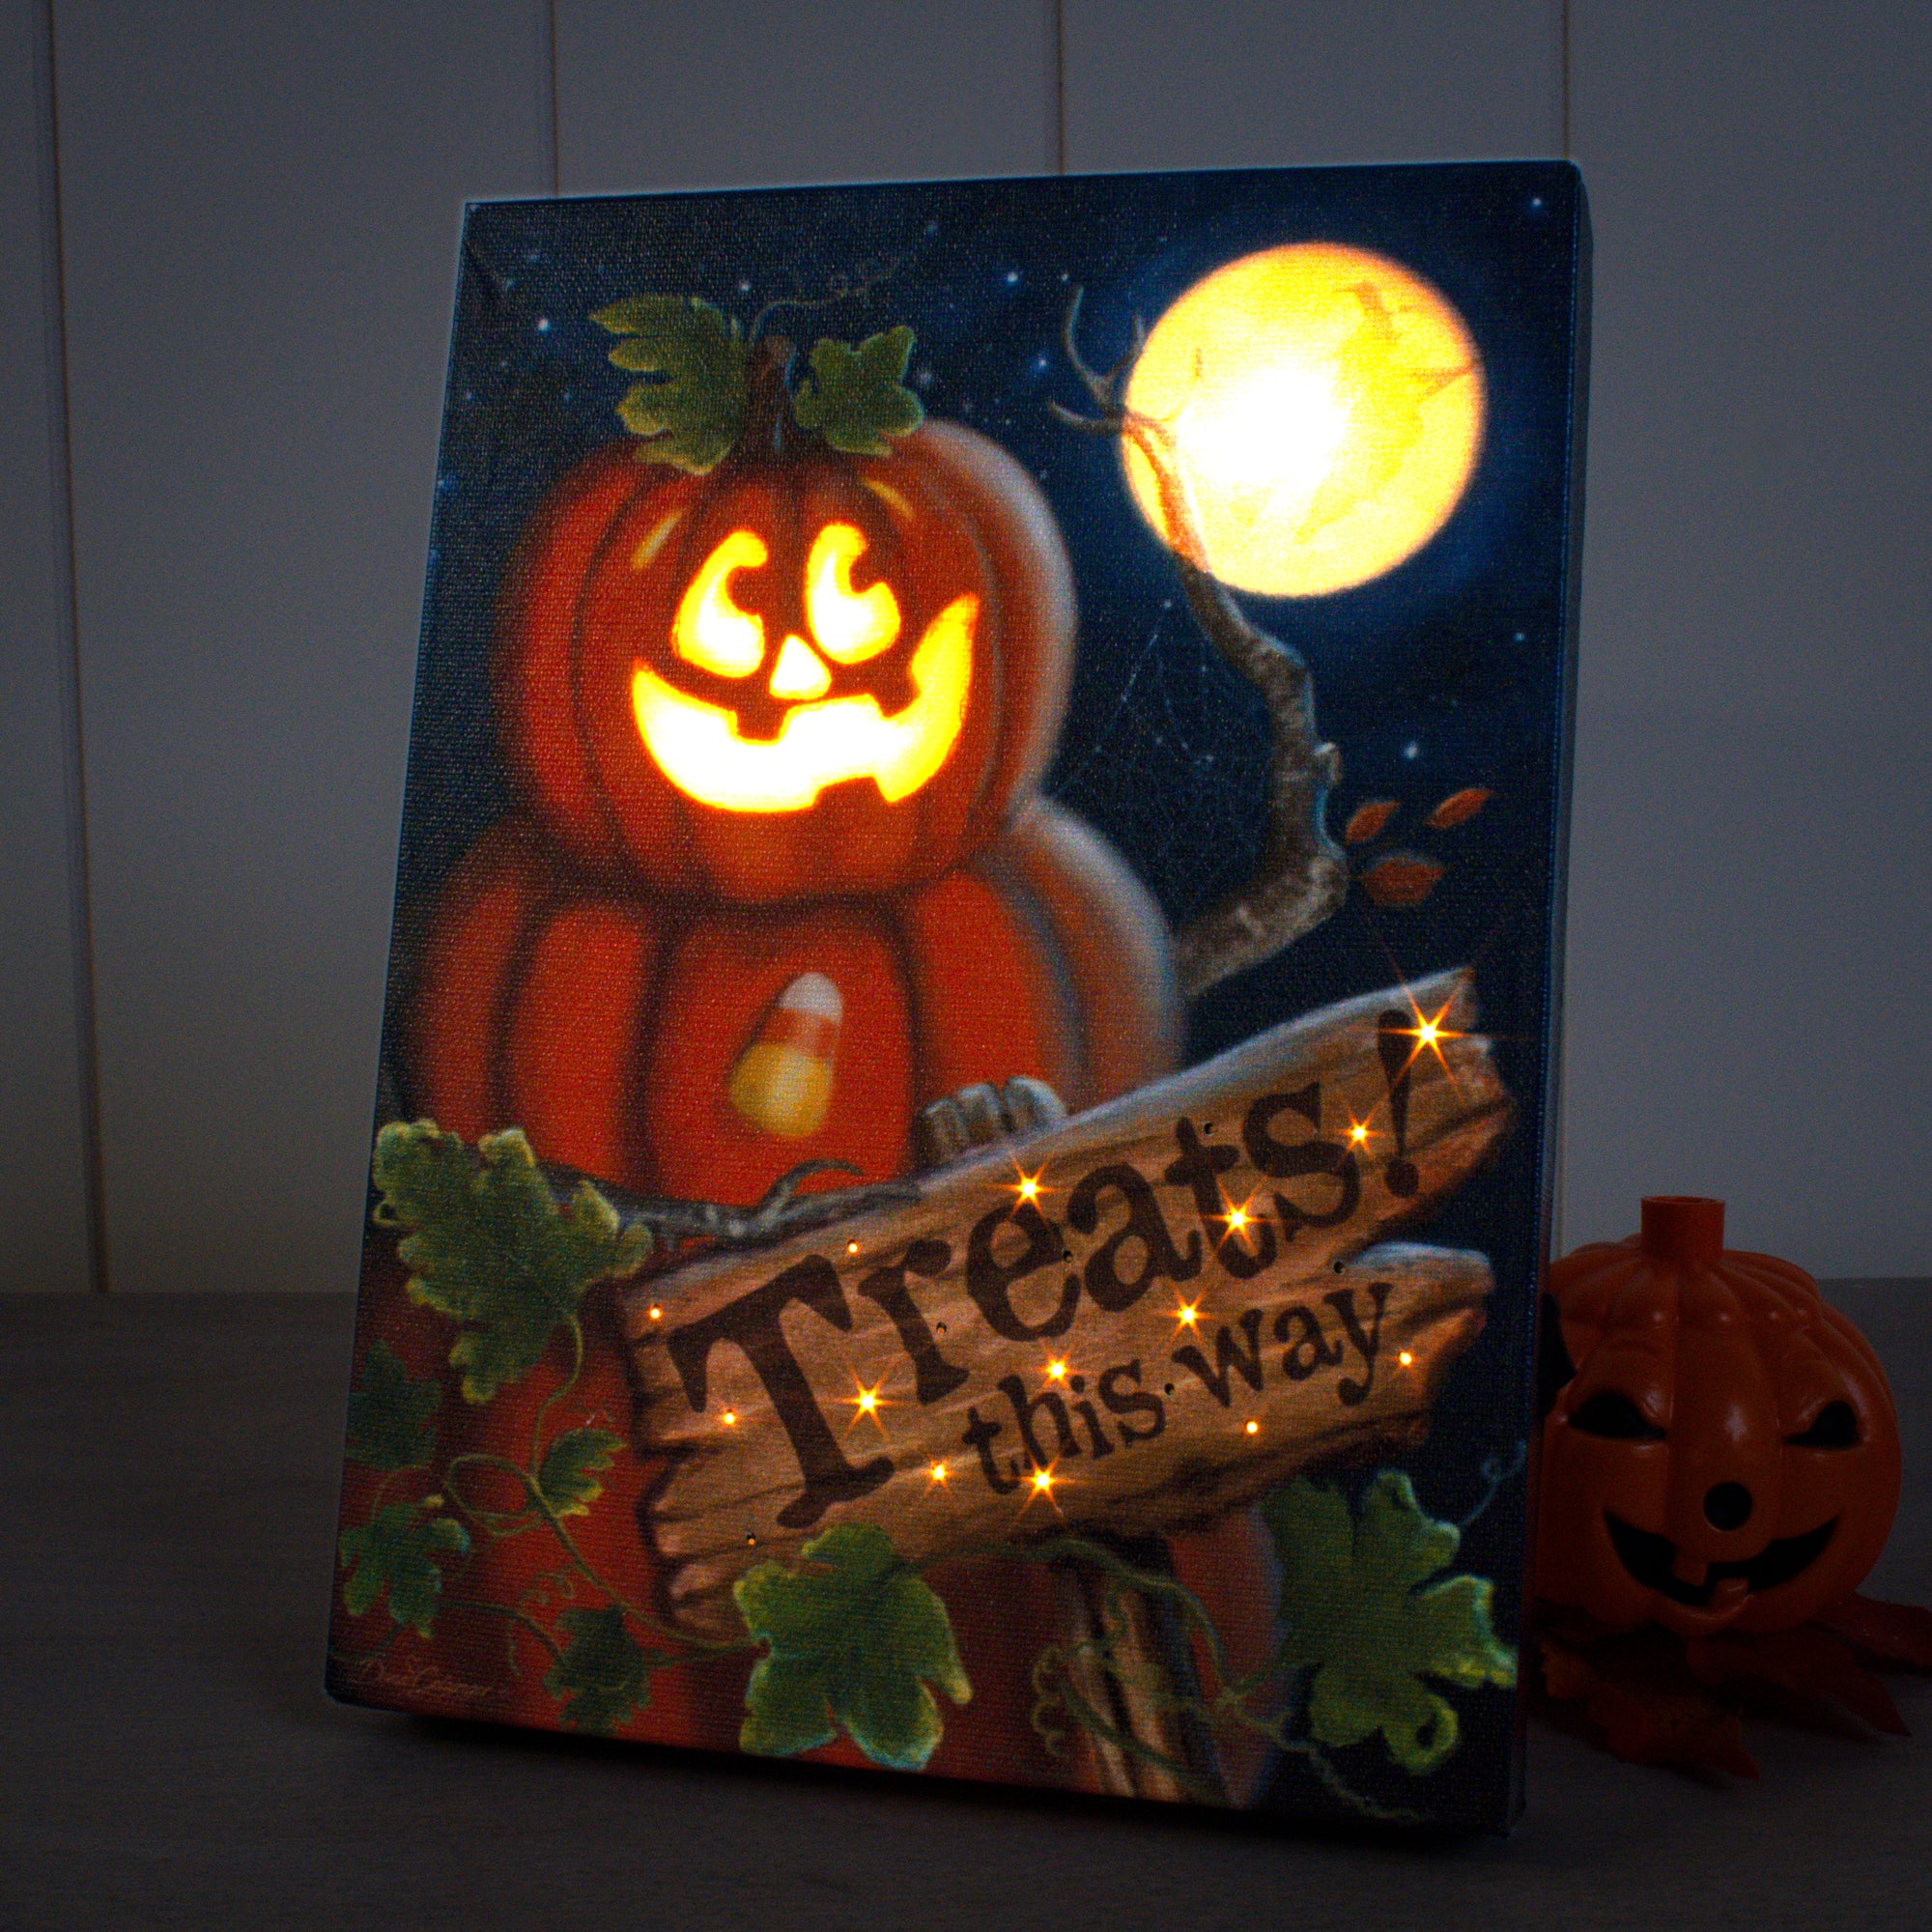 Treats This Way 8x6 Lighted Tabletop Canvas